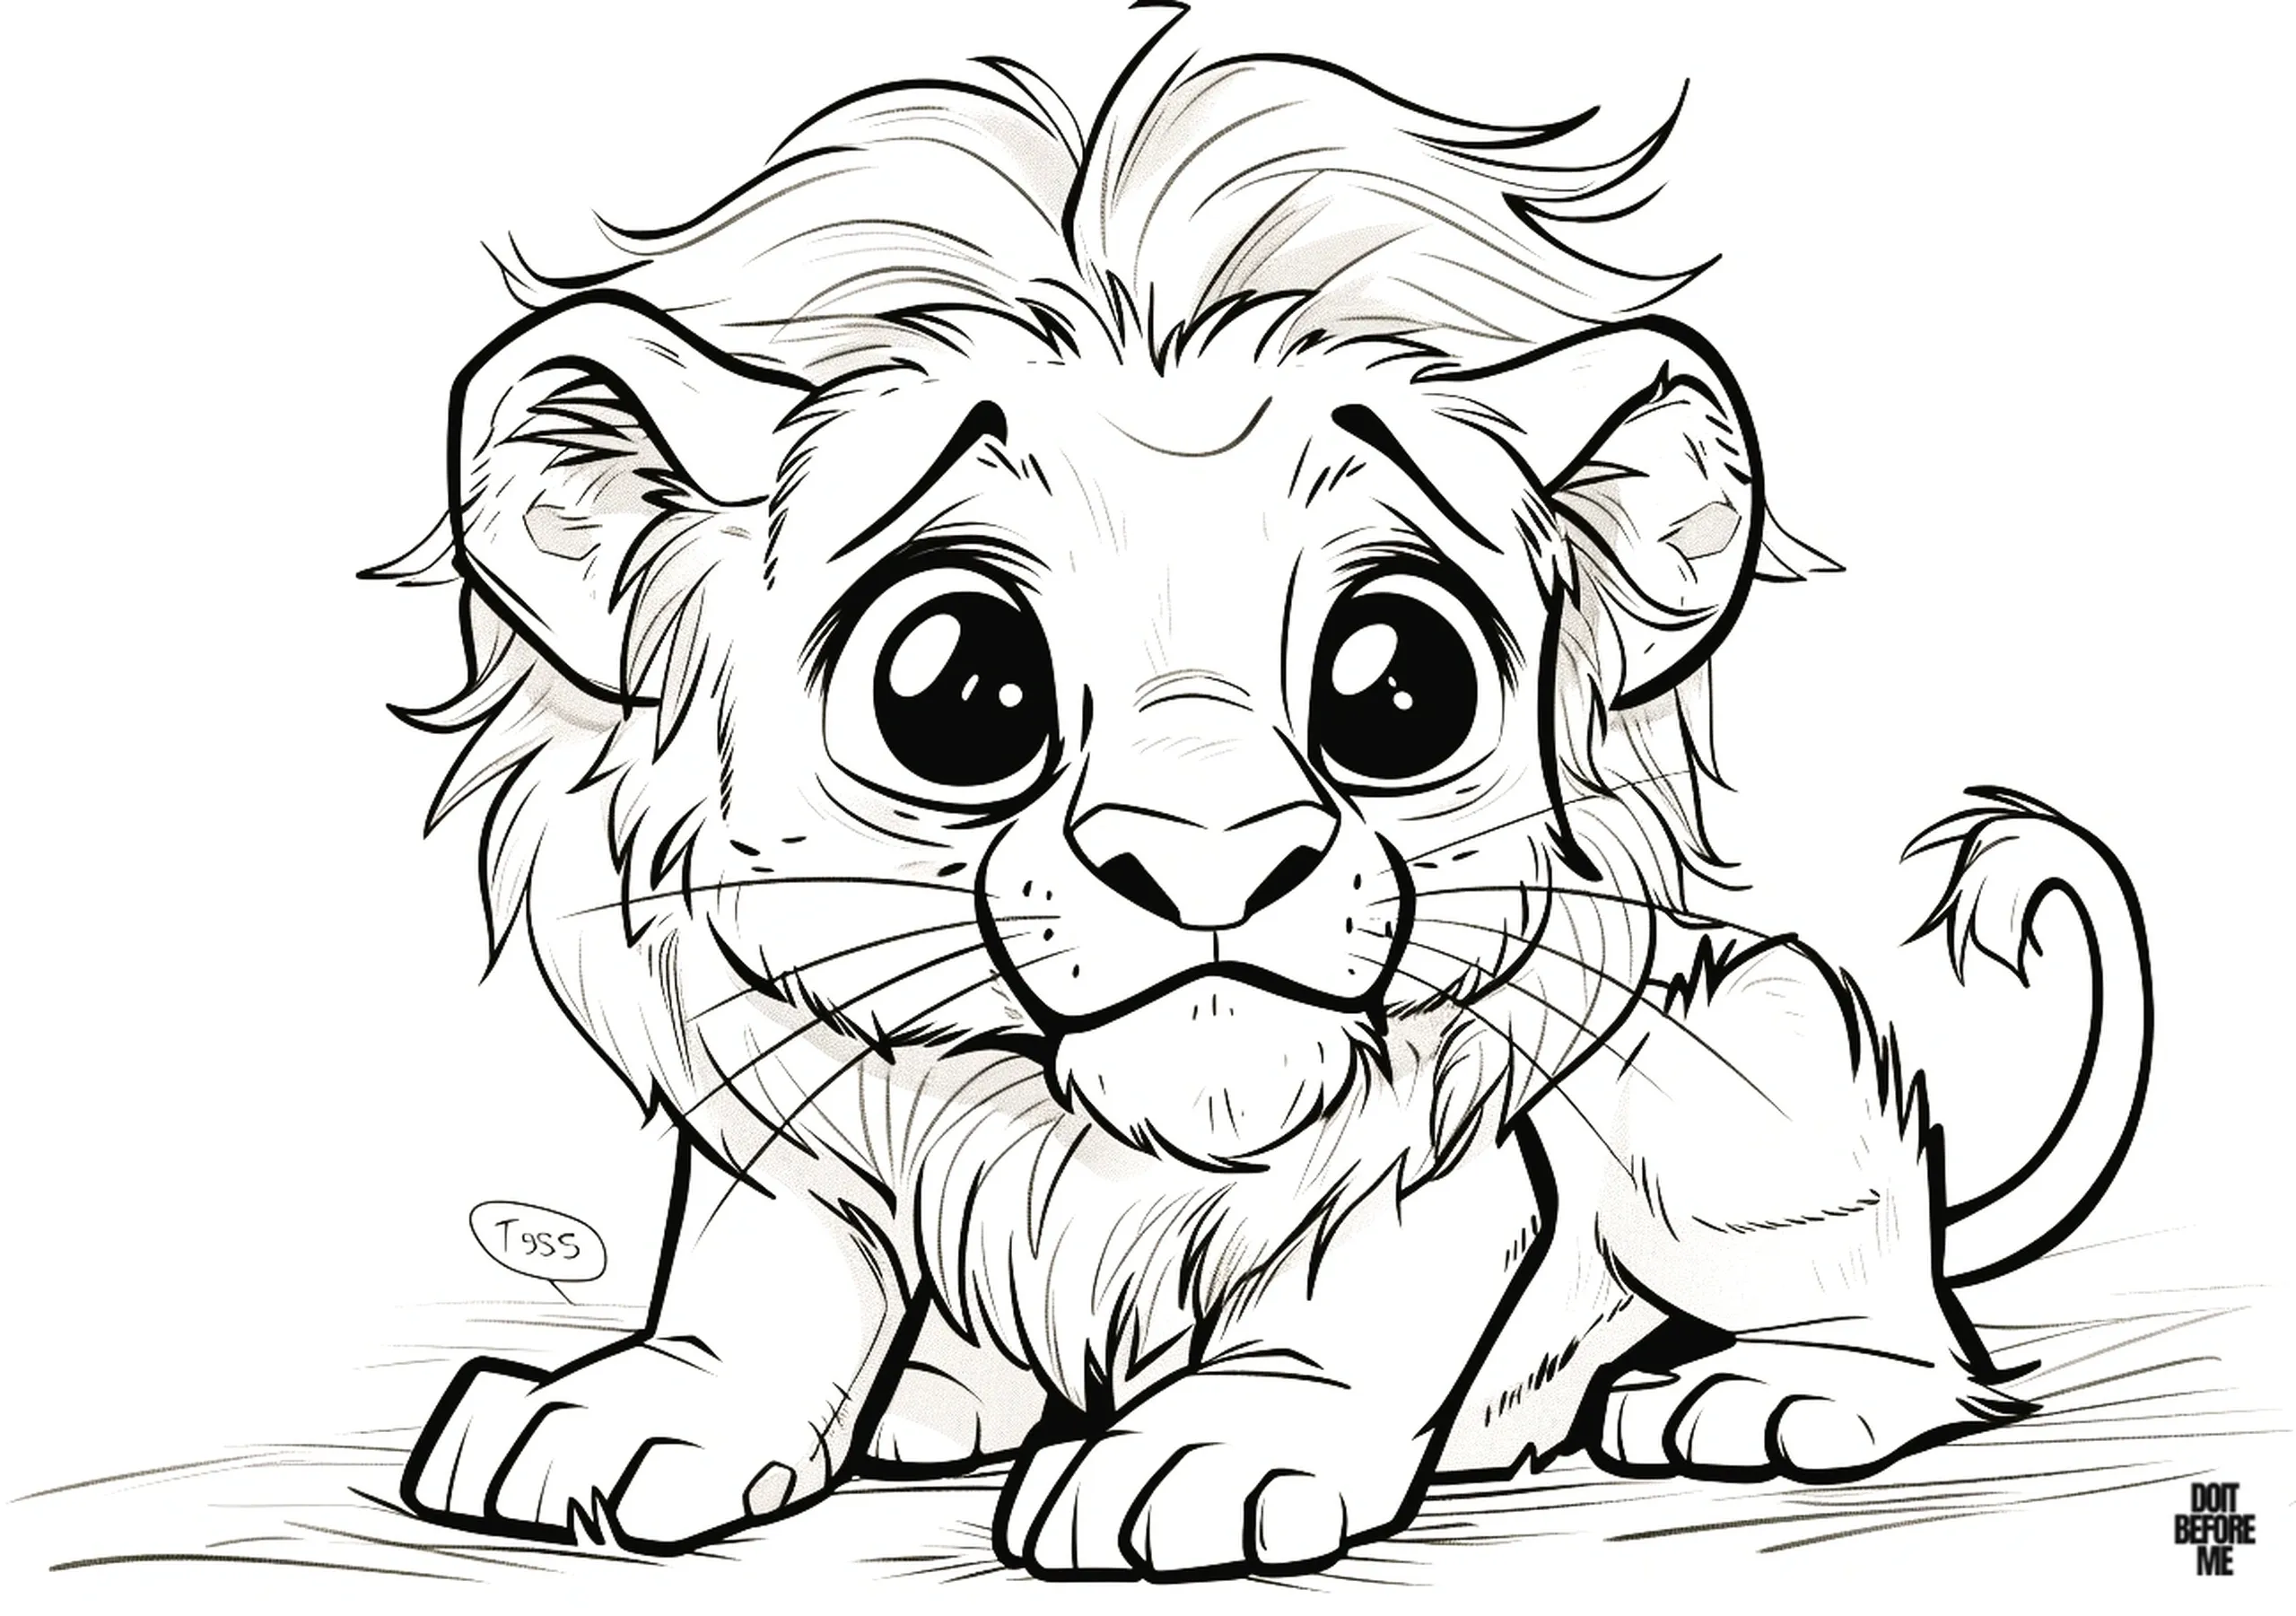 Printable coloring page of a young male lion cub with a pensive expression, characterized by downturned eyebrows and a wistful gaze. Designed for both kids and adults, offering an easy yet cute coloring.